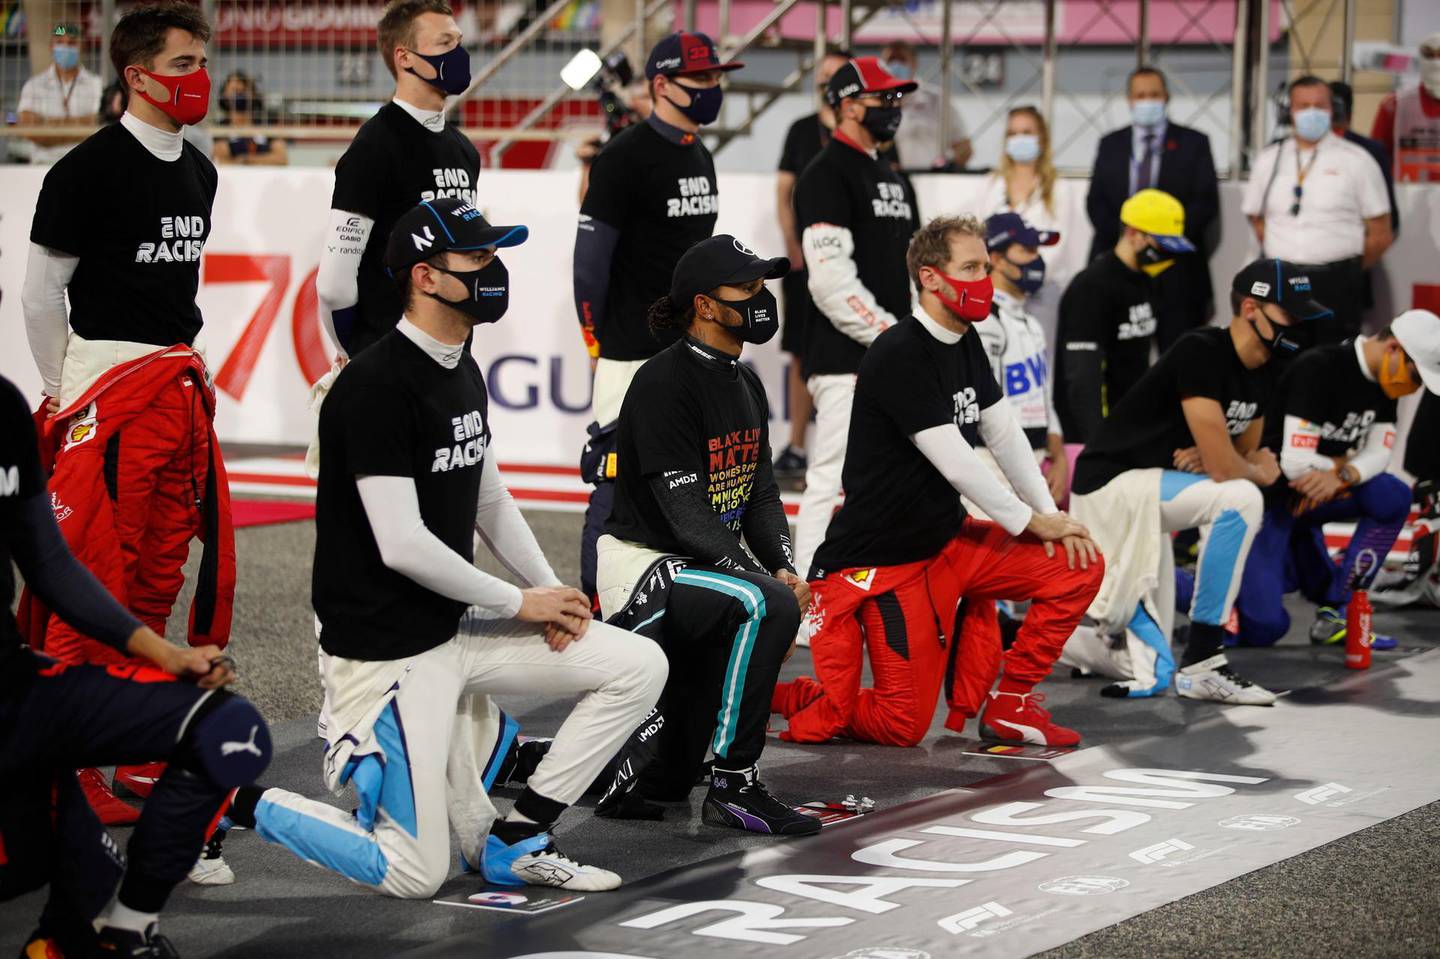 Mercedes driver Lewis Hamilton of Britain , centre, and Ferrari driver Sebastian Vettel of Germany, right, take the knee in support of the Black Lives Matter campaign and End Racism Recognition event ahead of the Bahrain Formula One Grand Prix at the Bahrain International Circuit in Sakhir, Bahrain, Sunday, Nov. 29, 2020. (Hamad Mohammed, Pool via AP)